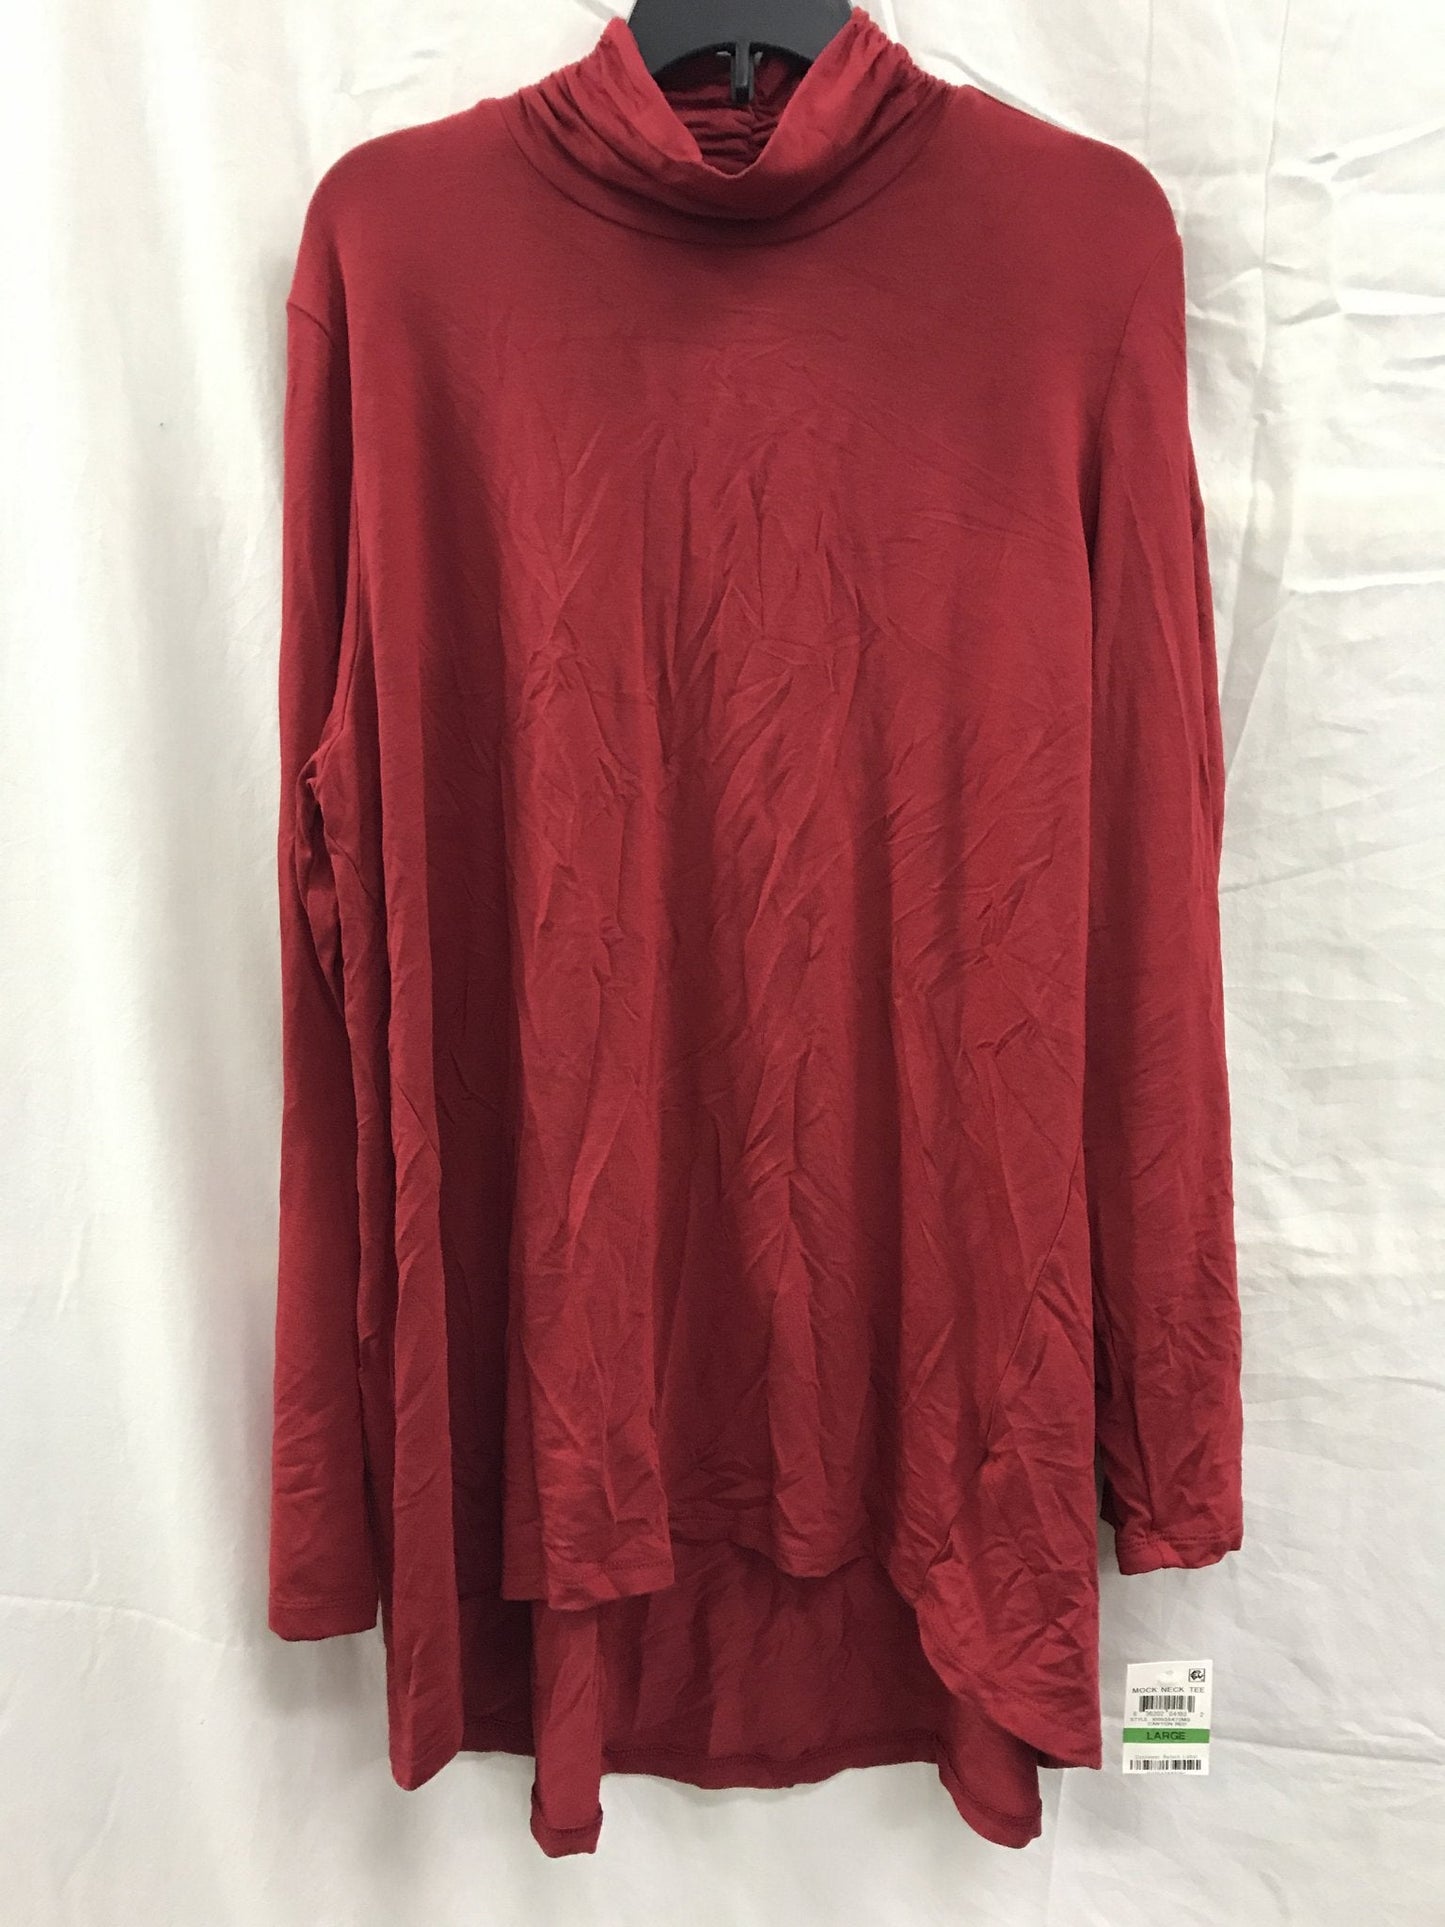 Style & Co Mockneck Long Sleeve Top Red S